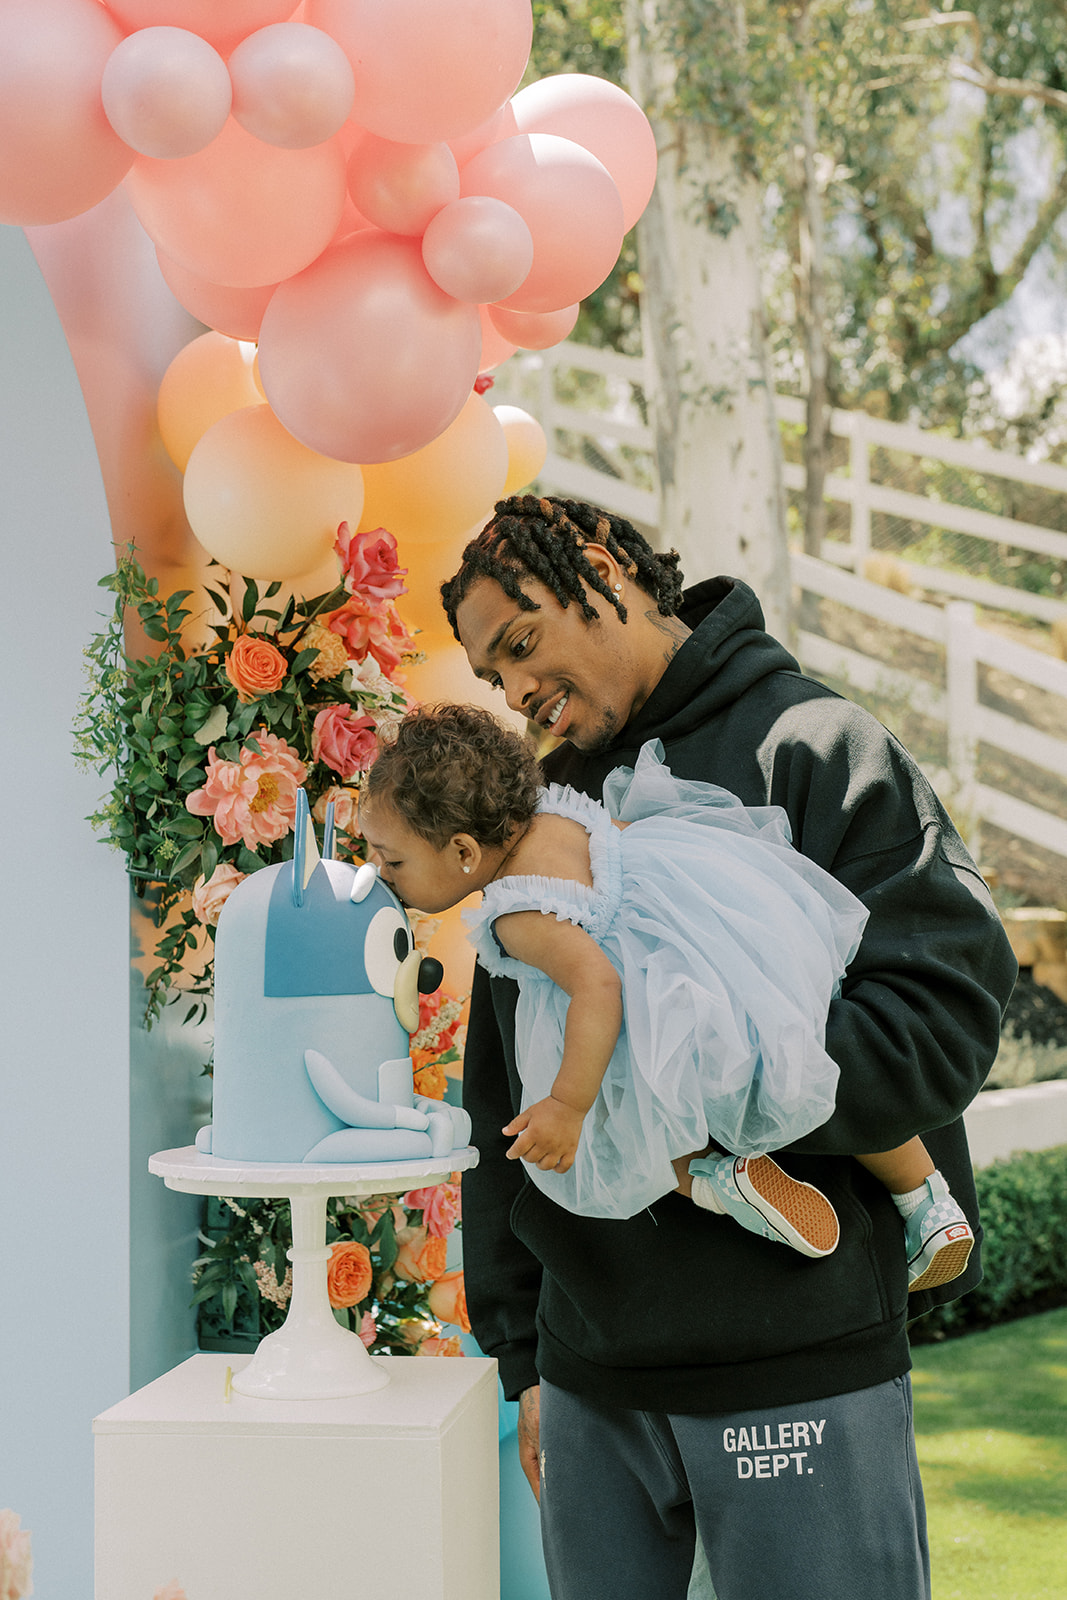 Jalen Ramsey at his daughter's birthday party